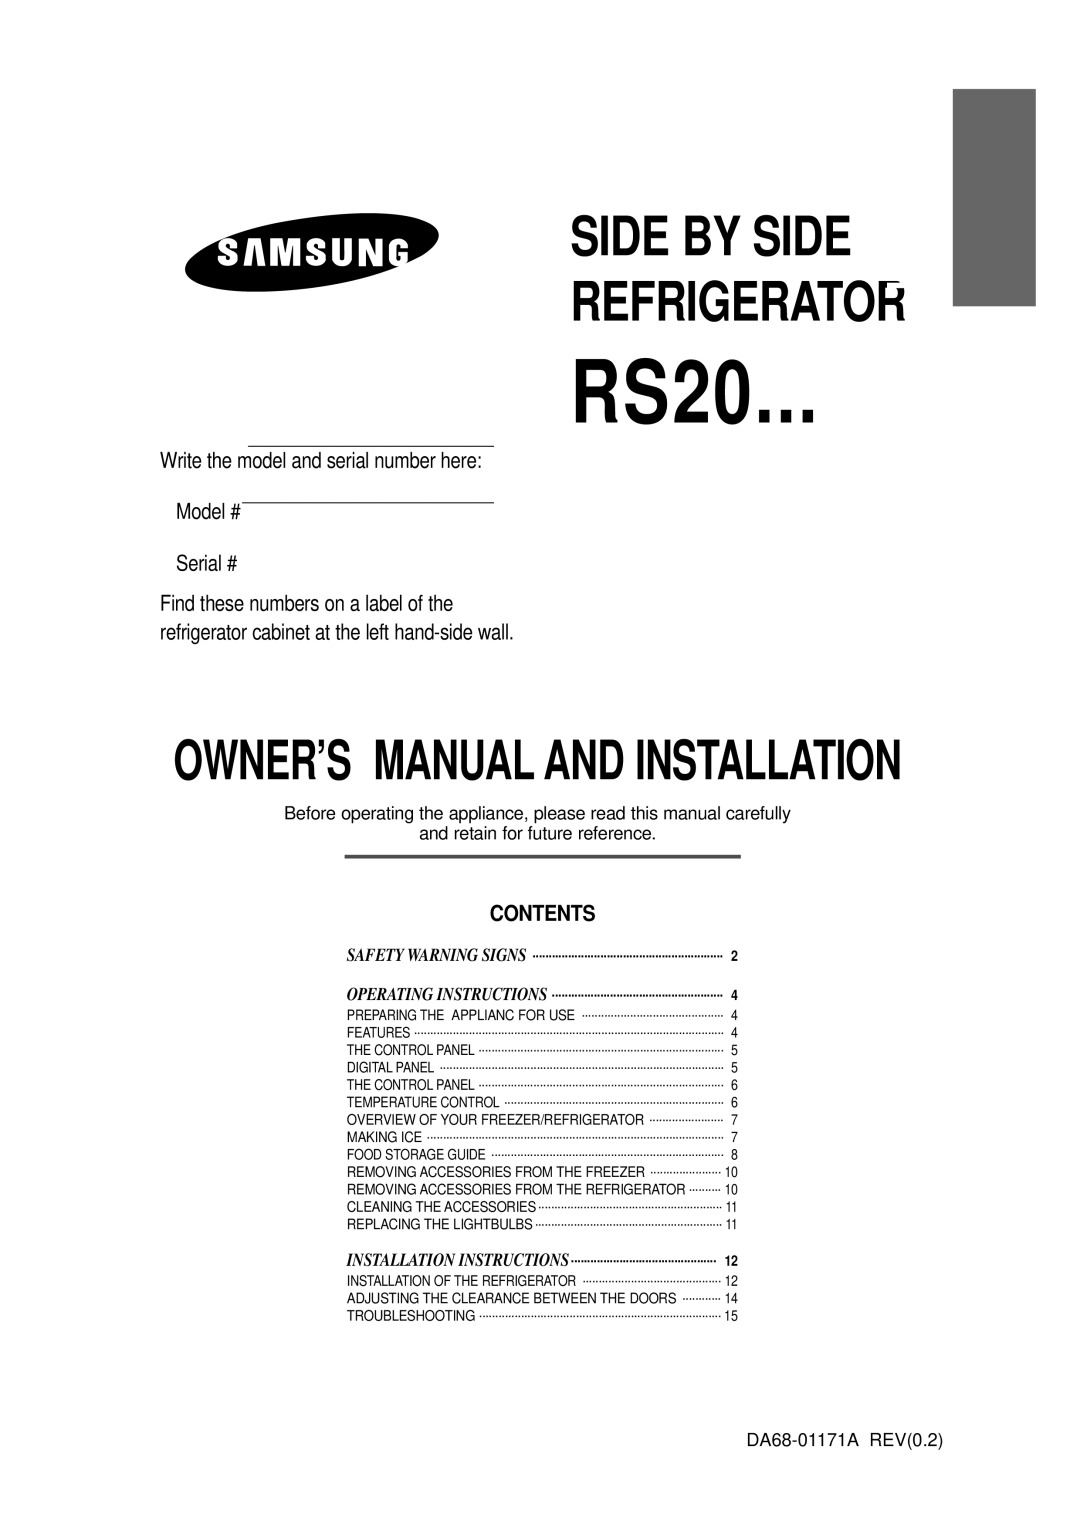 Samsung SRS536NP owner manual Contents, RS20, Side By Side Refrigerator, Write the model and serial number here Model # 